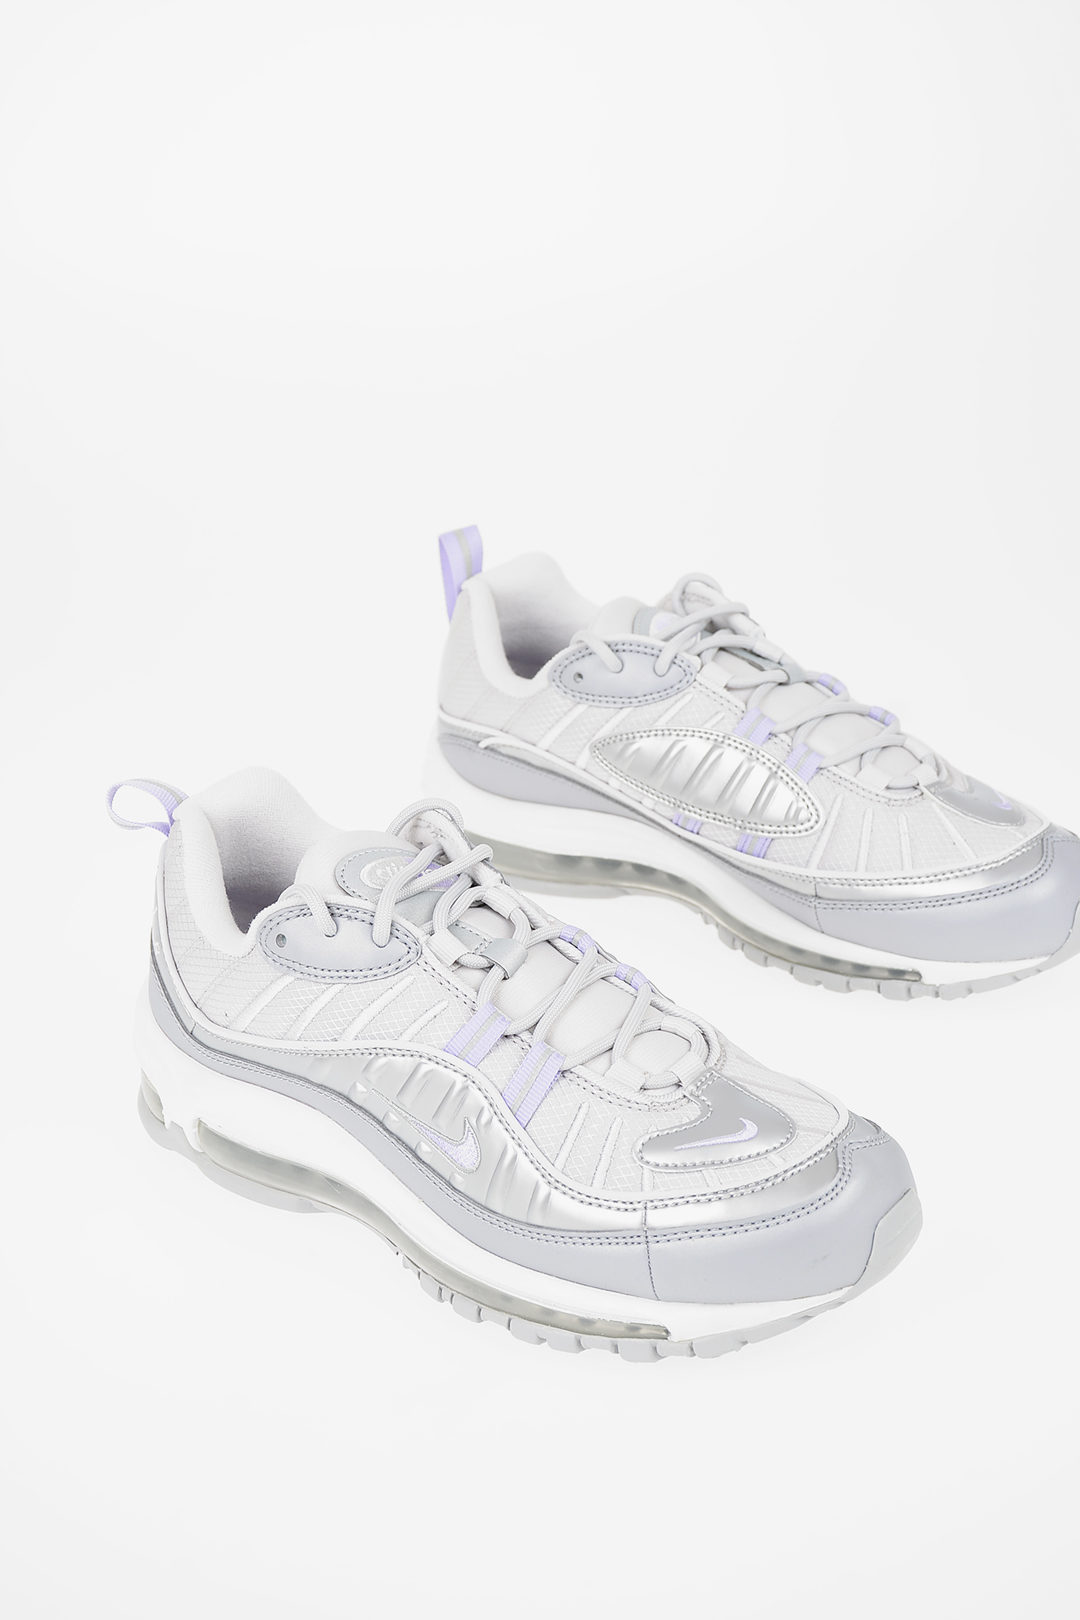 Exquisito tornado Agotar Nike Fabric AIR MAX 98 SE Sneakers women - Glamood Outlet